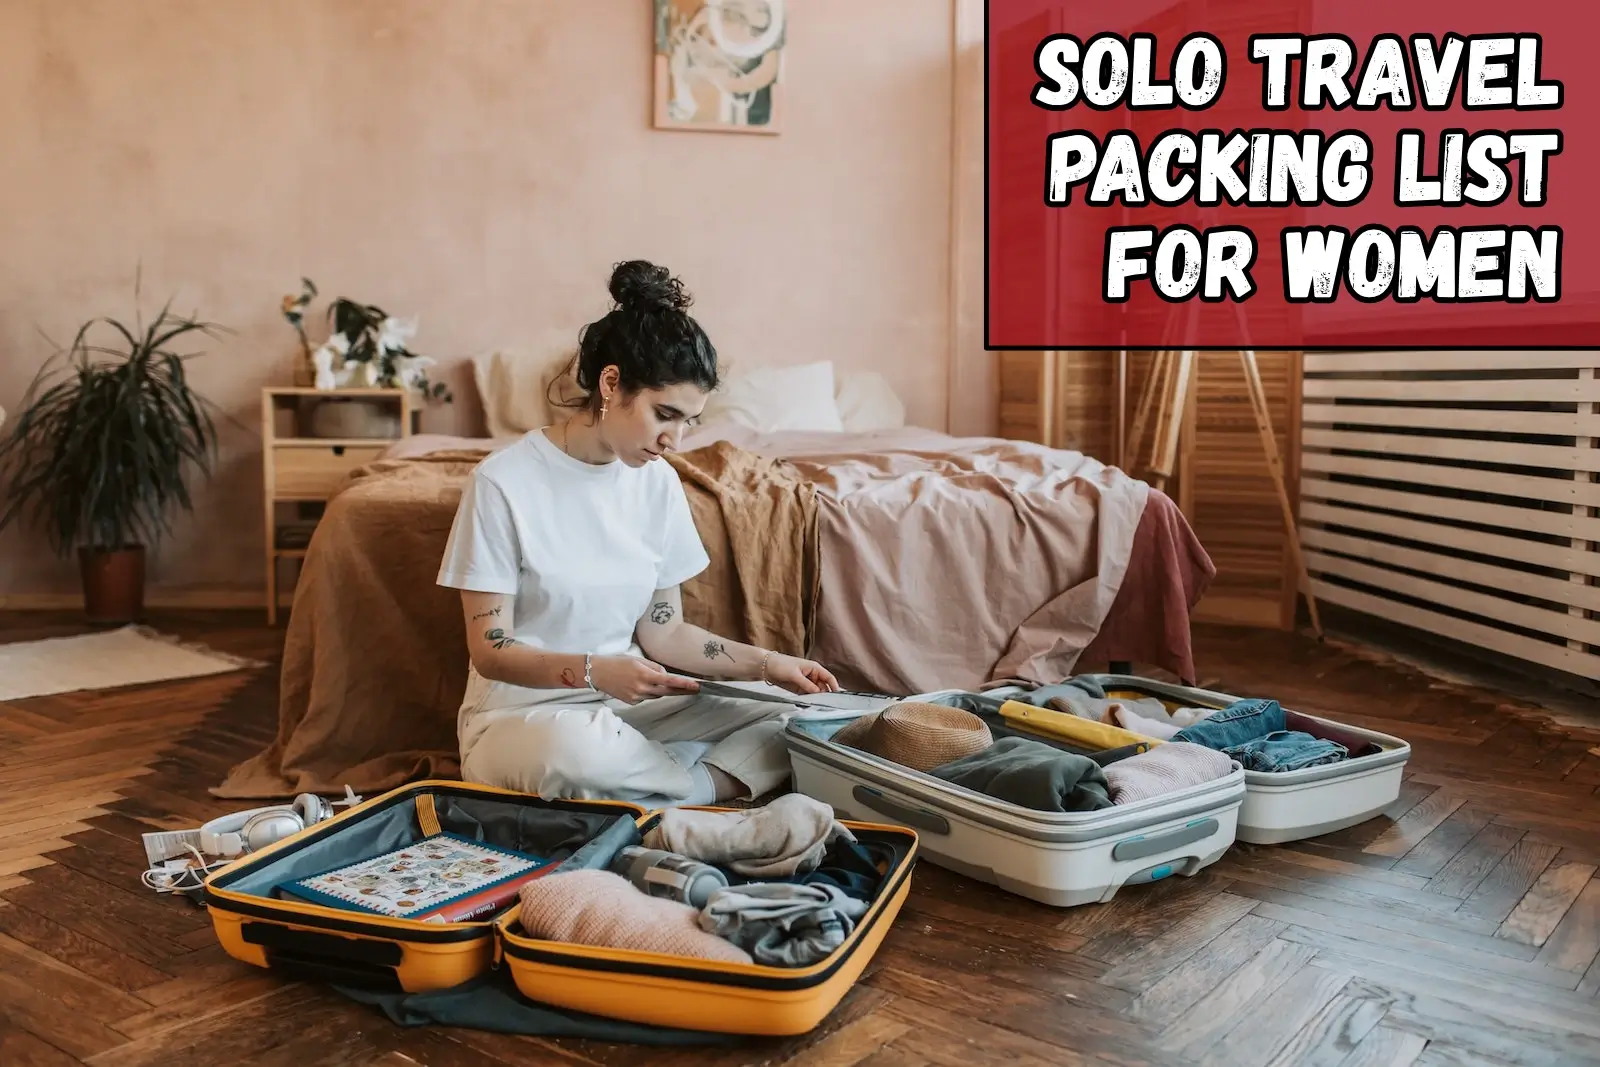 Top 10 Female Travel Essentials « Solo Travel Woman